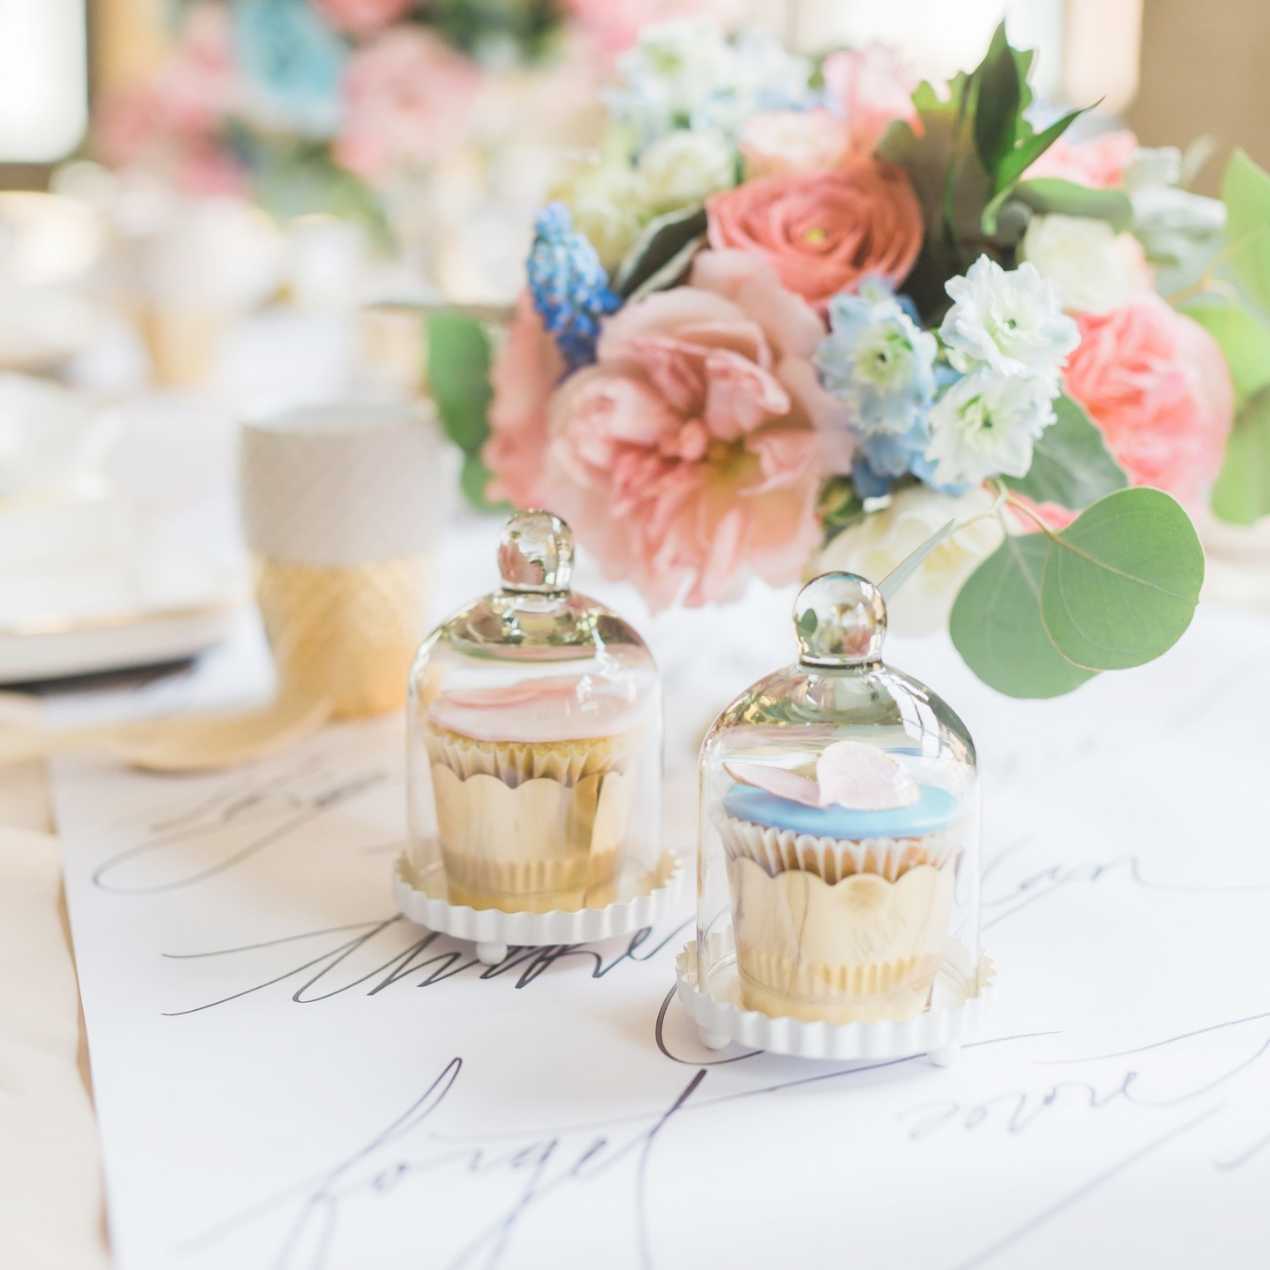 Inspiration - small bell jar with white base